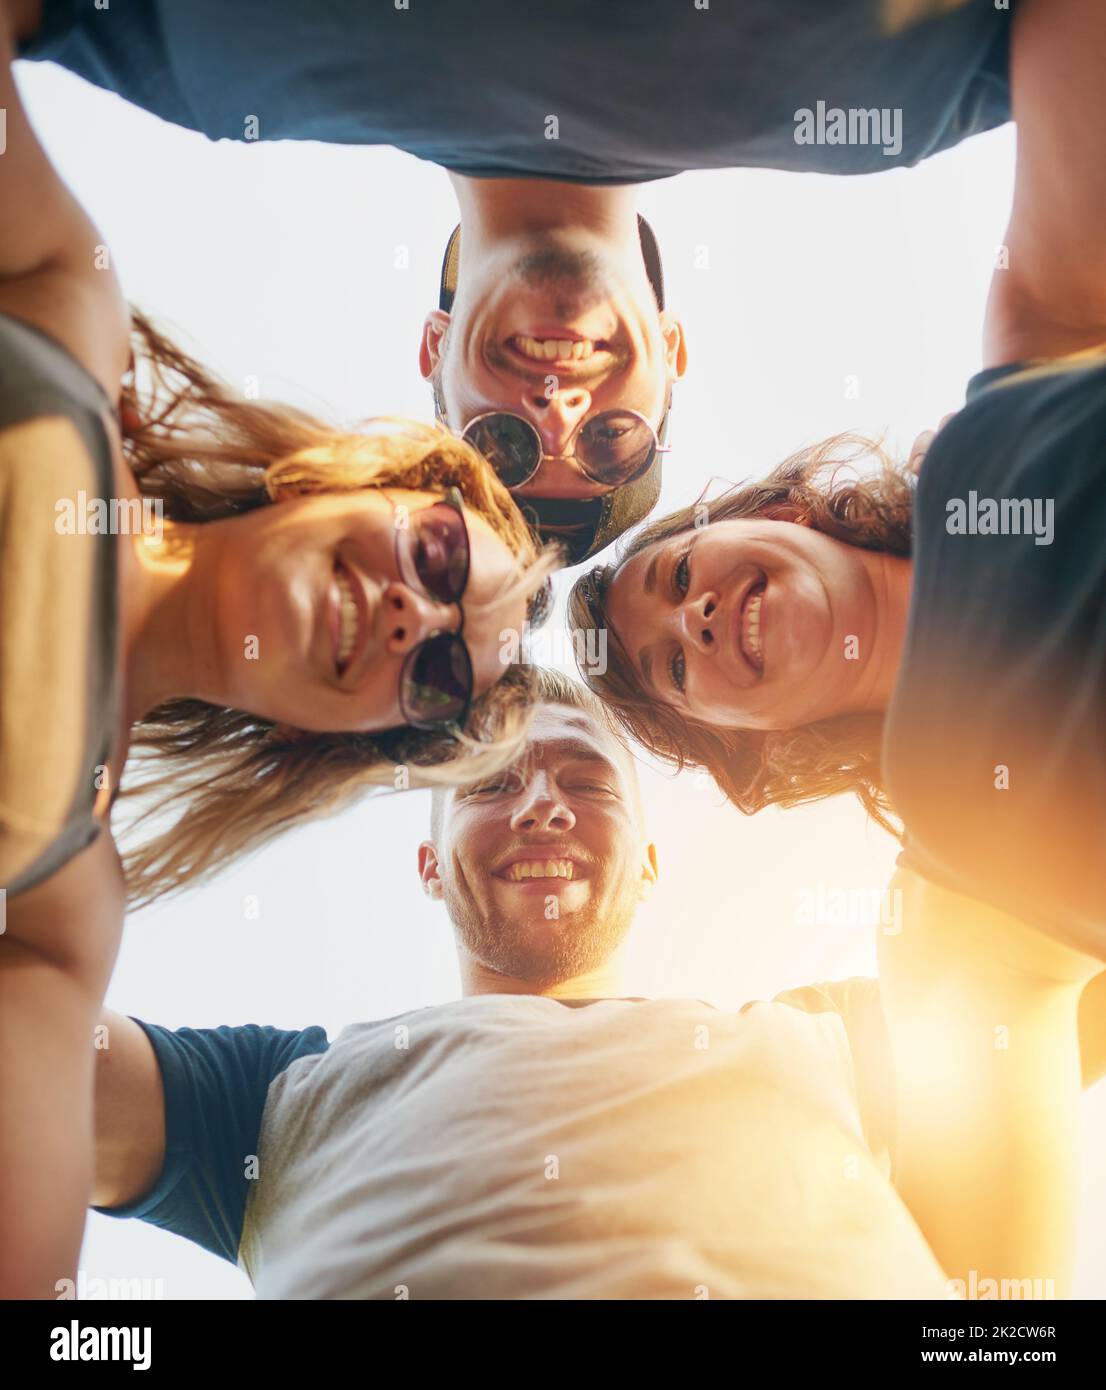 United in friendship. Low angle shot of a group of happy young friends posing outside. Stock Photo